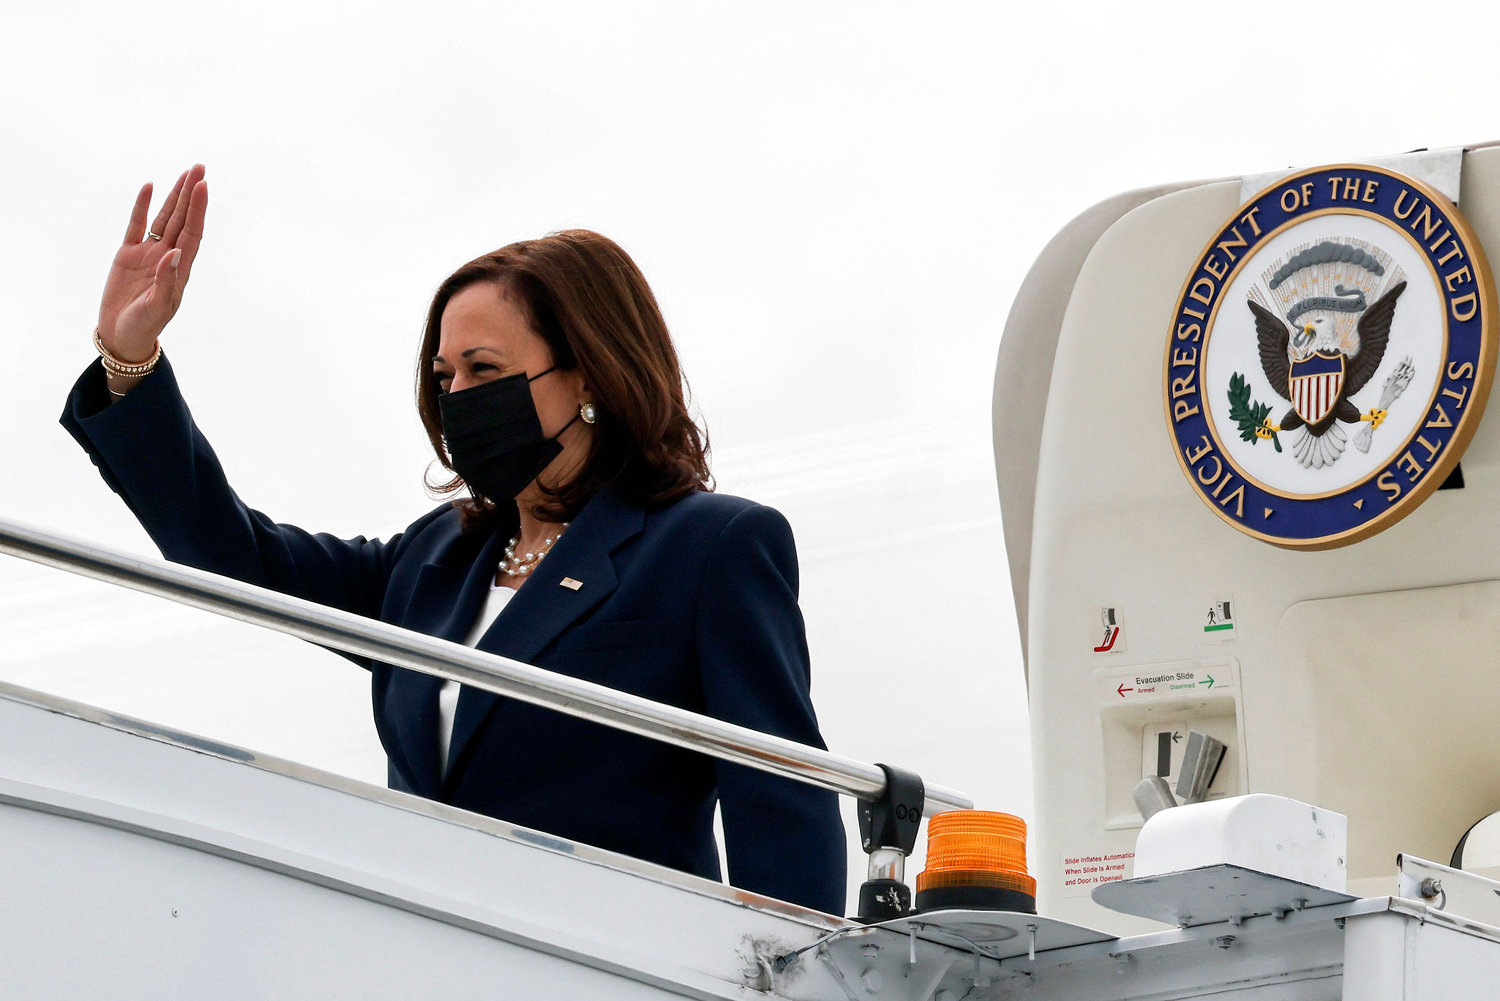 US Vice President Kamala Harris waves upon arrival at Paya Lebar Base airport in Singapore, August 22, 2021. (EVELYN HOCKSTEIN/POOL/AFP via Getty Images/TNS)